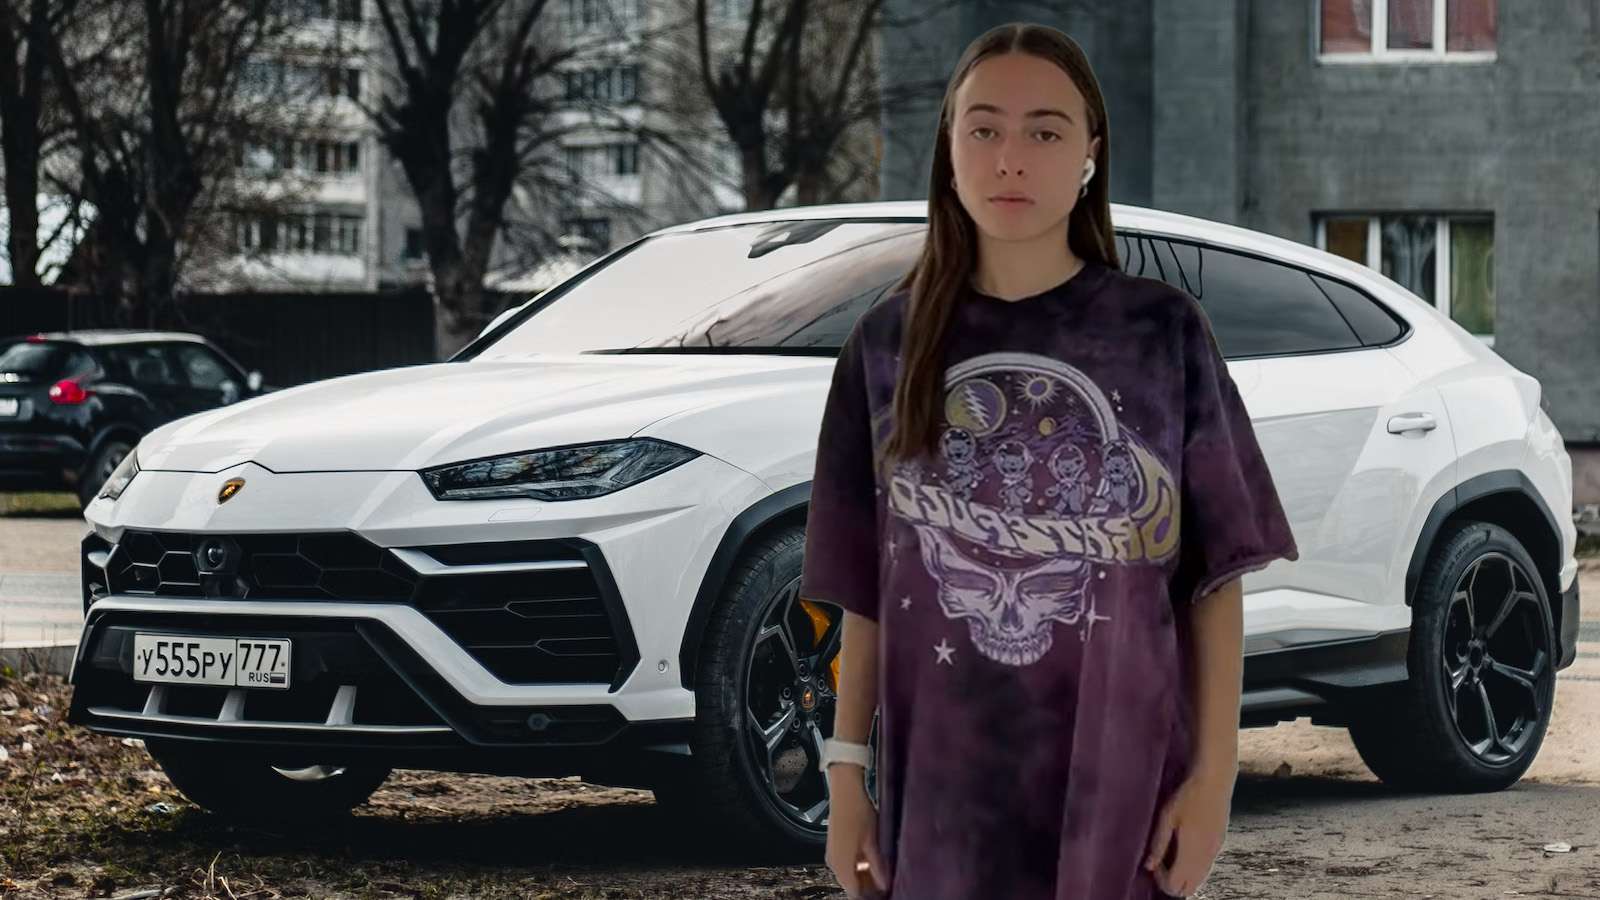 TikTok outraged over girl’s complaints she didn’t get Lambo she wanted as her first car